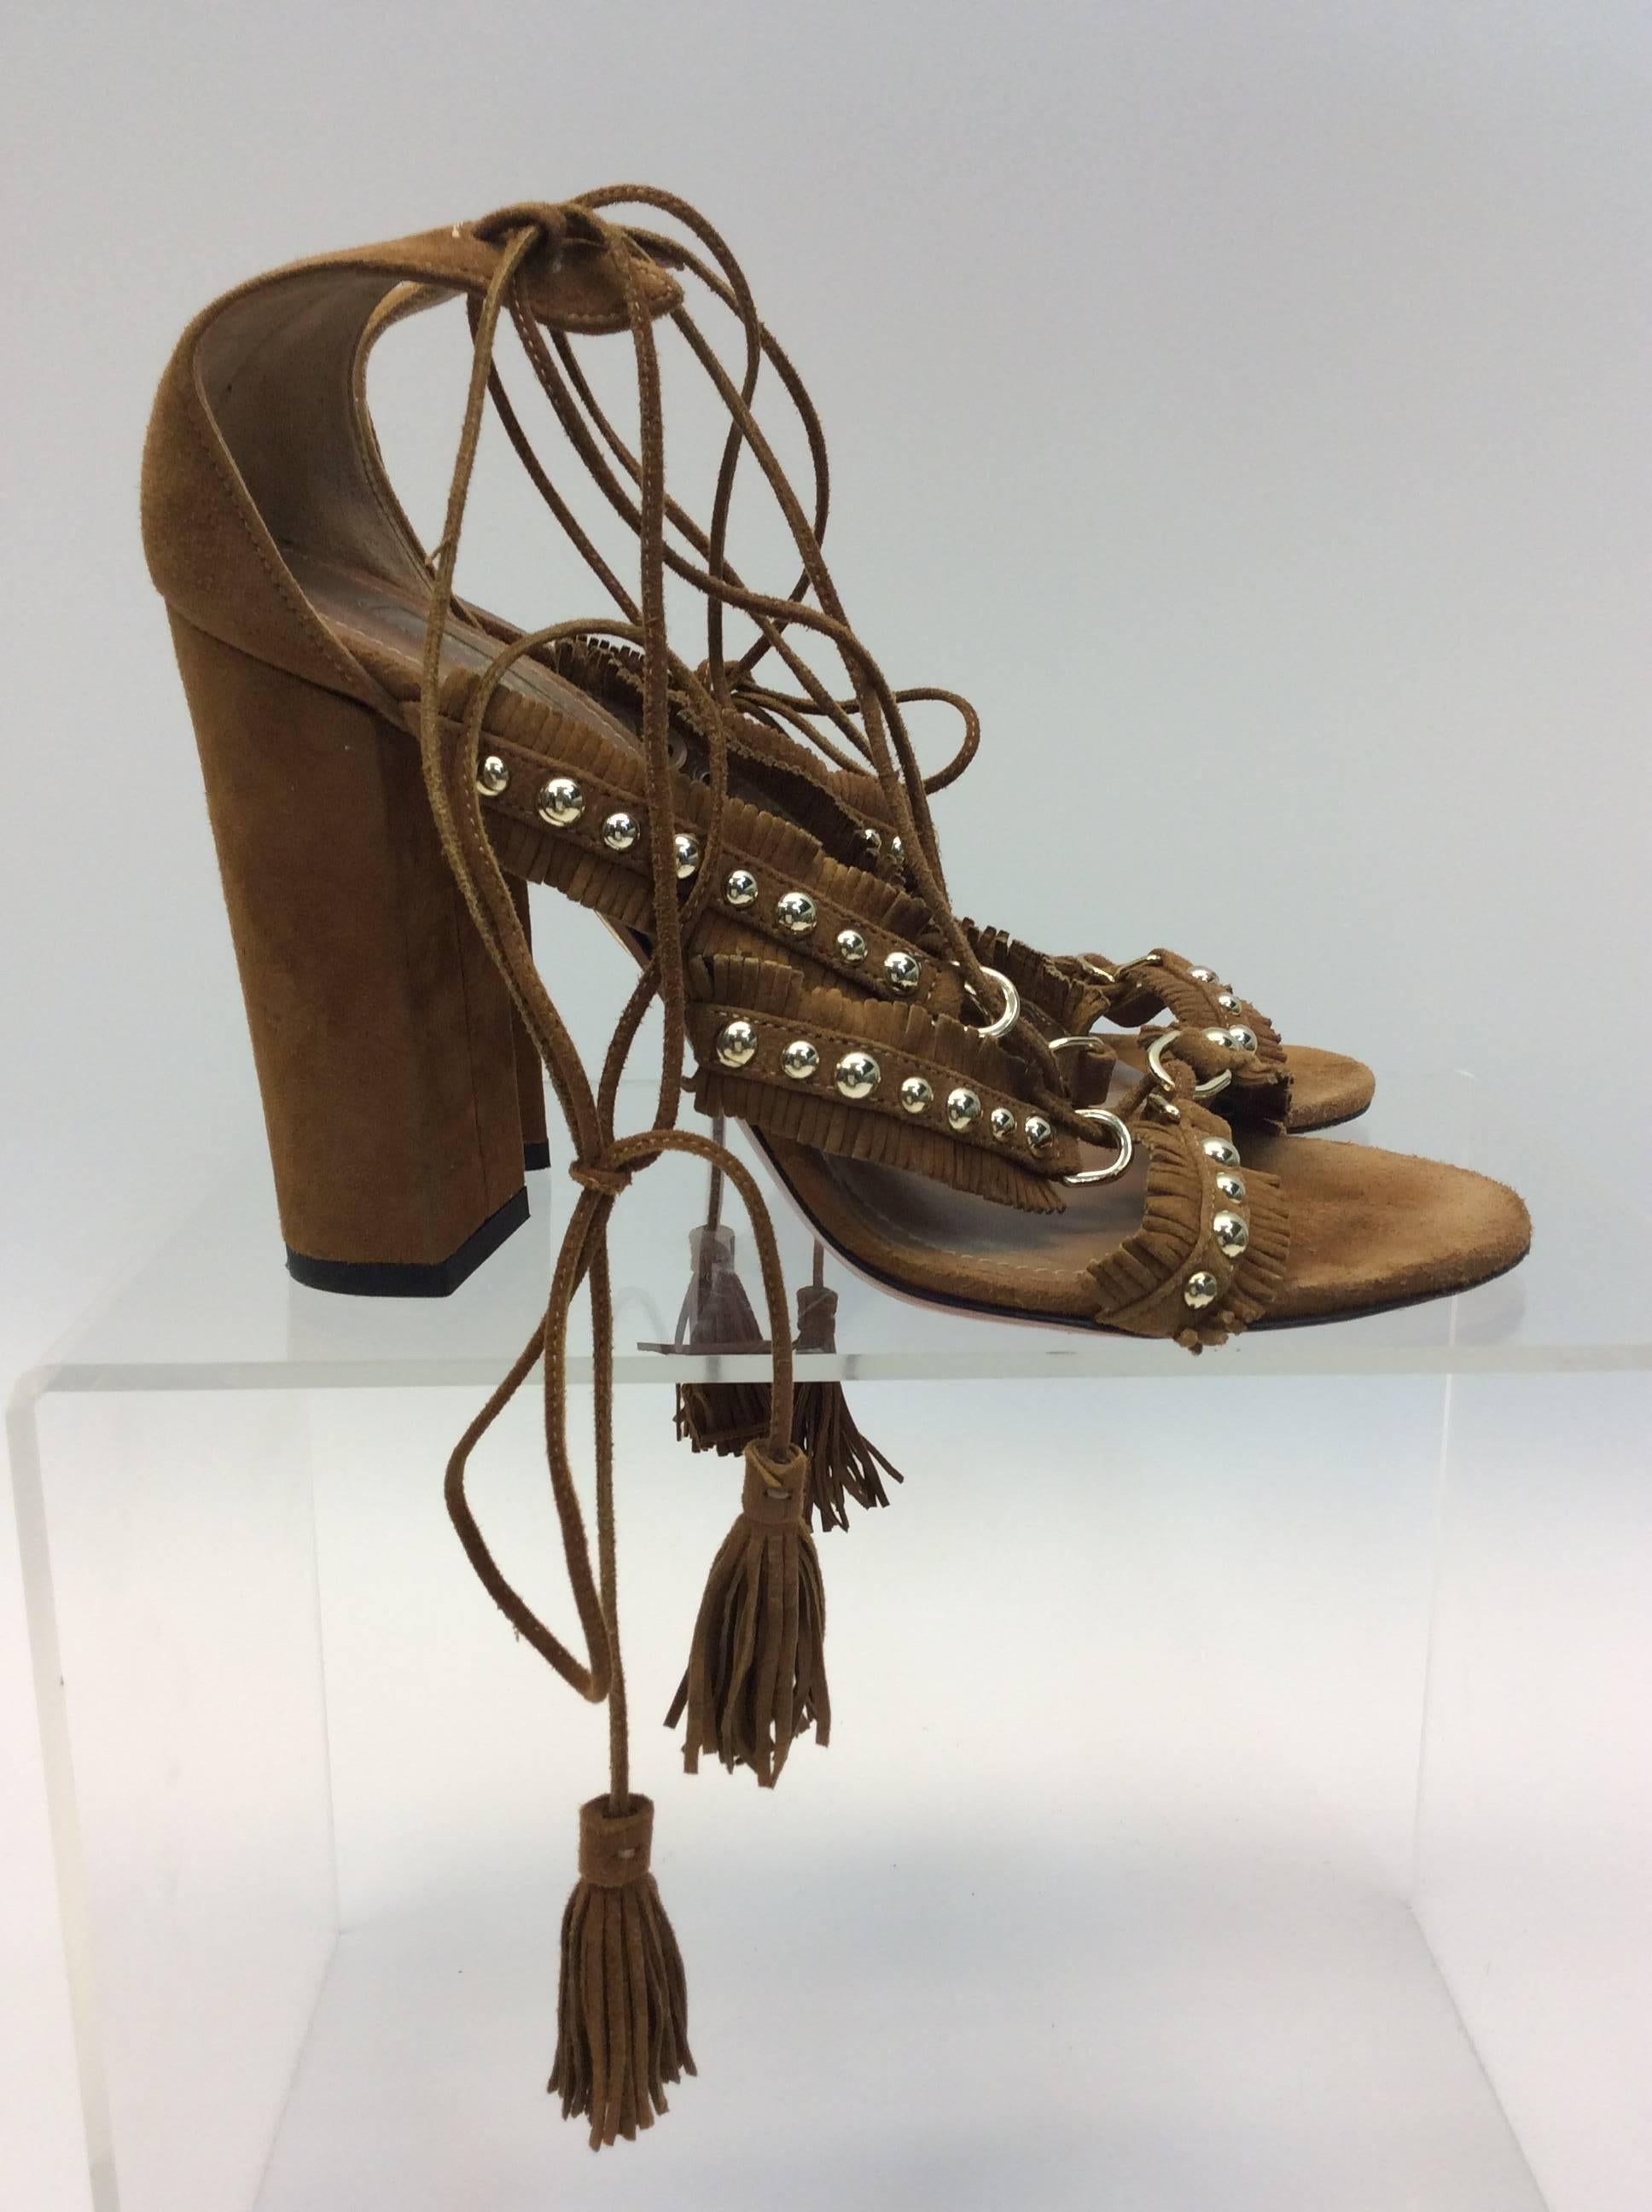 Aquazzura Firenze Tan Suede Studded Sandal In Excellent Condition For Sale In Narberth, PA